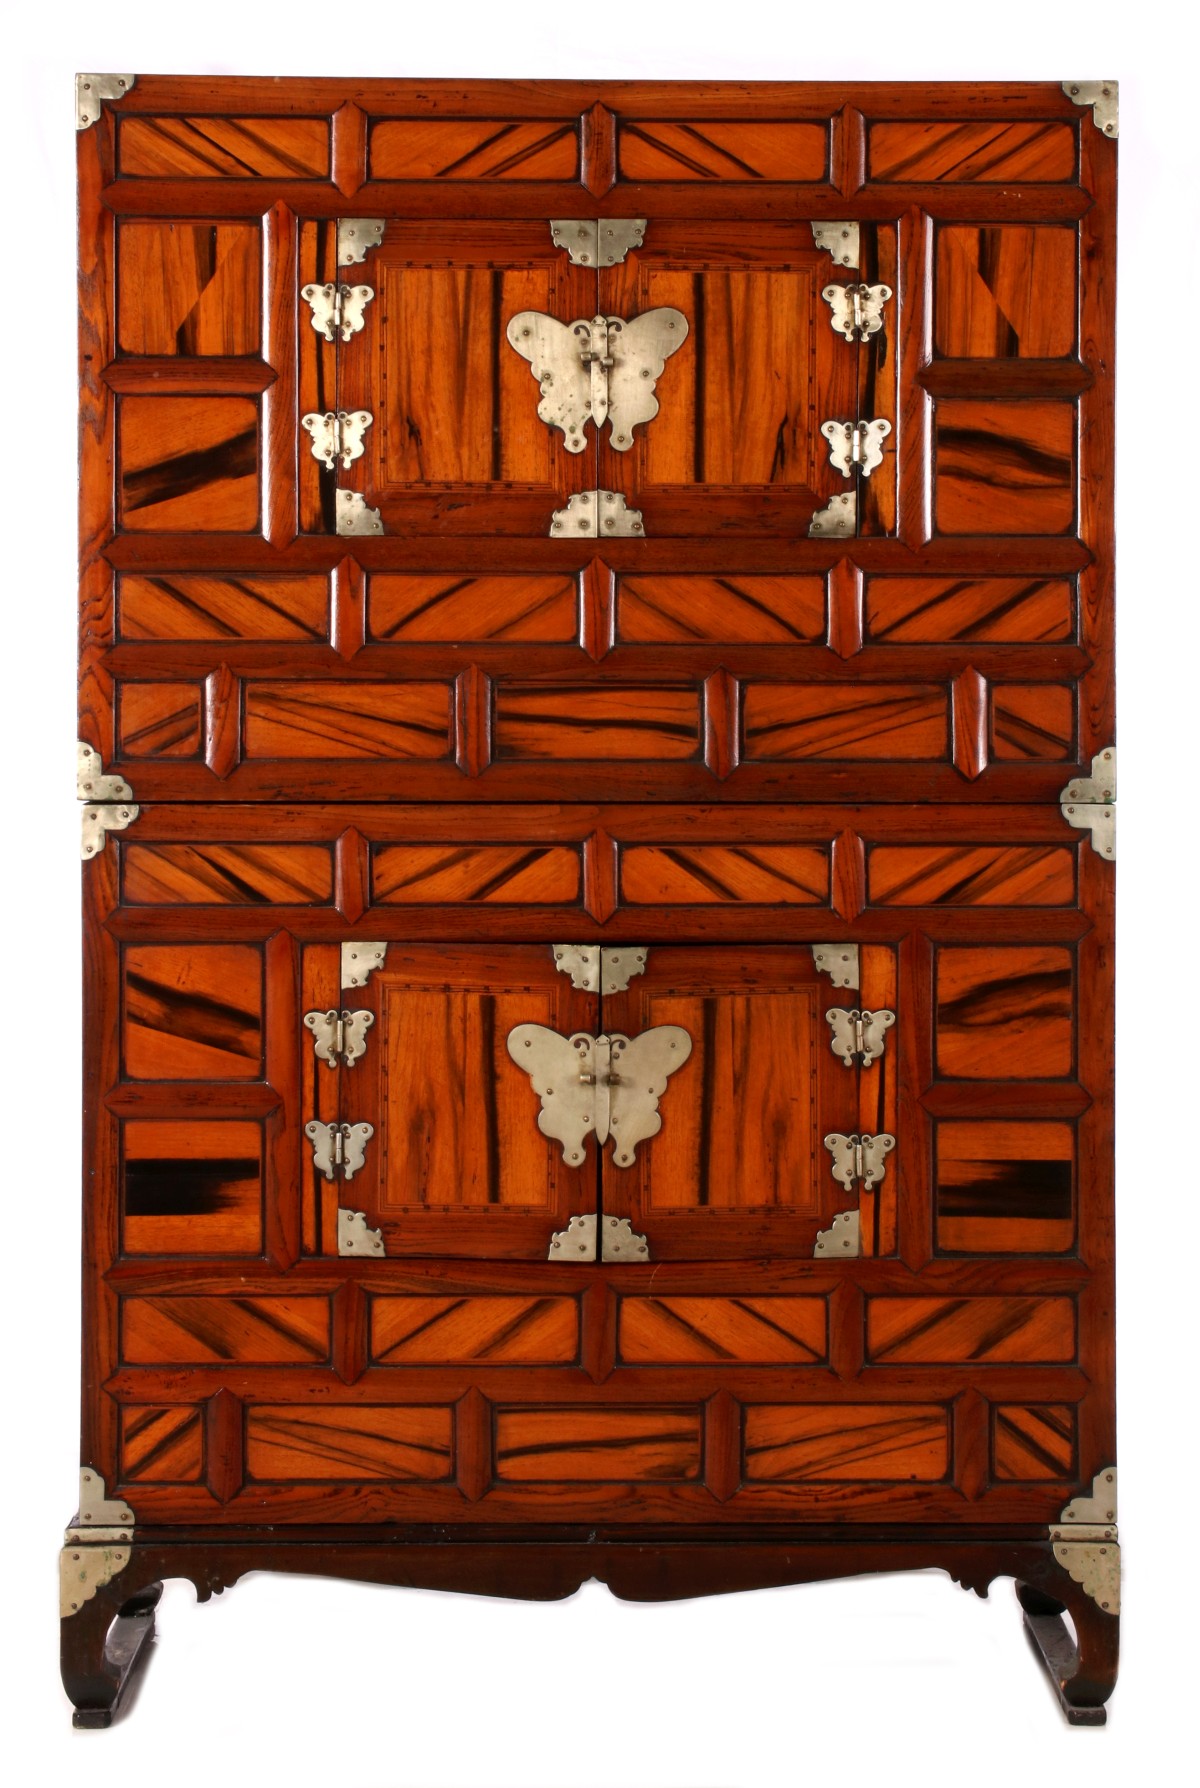 A TALL, HIGHLY FIGURED 19TH CENTURY KOREAN TANSU CHEST